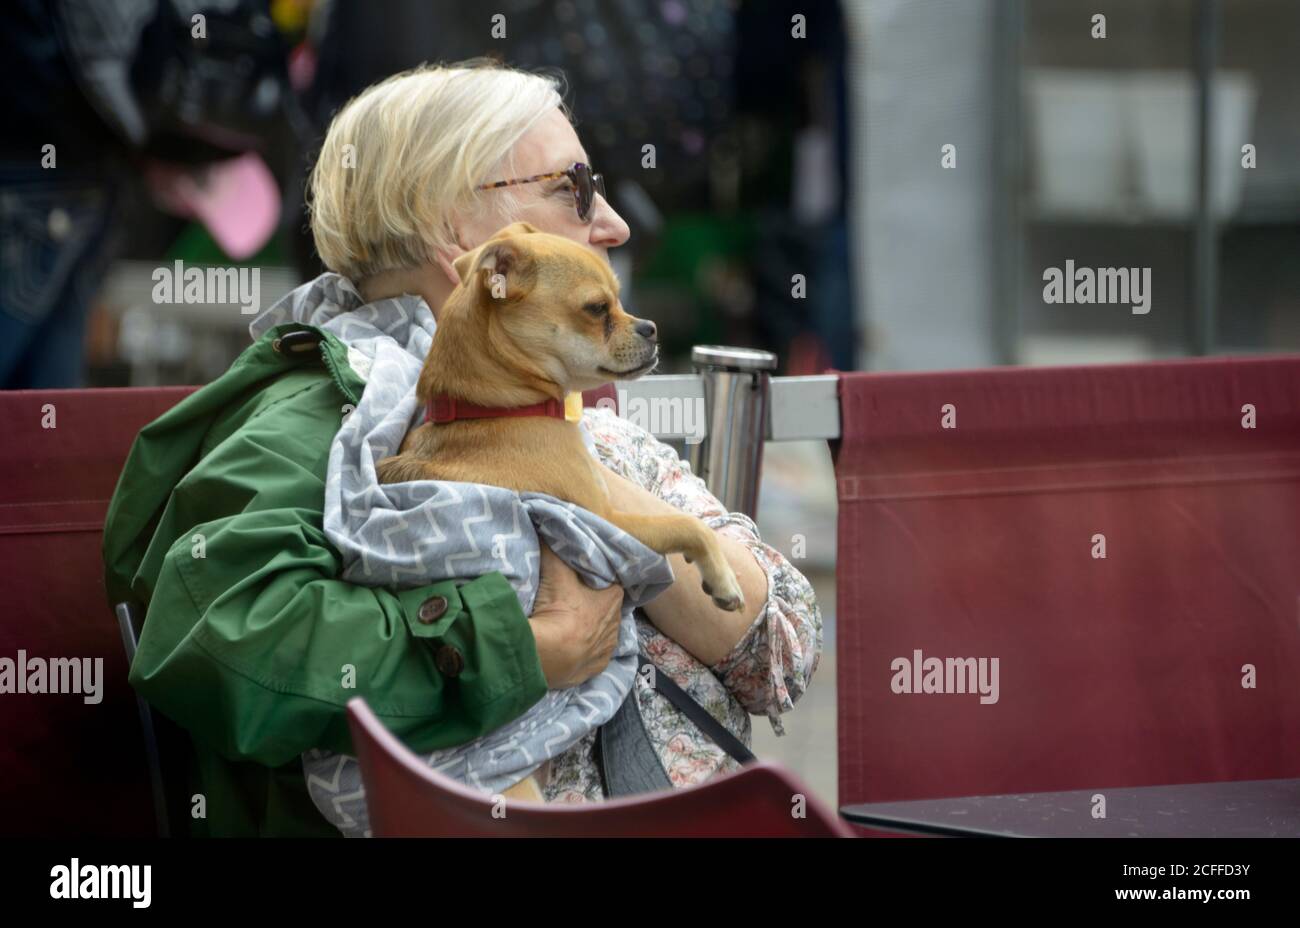 Lady with dog, at outdoor seating area of cafe Stock Photo